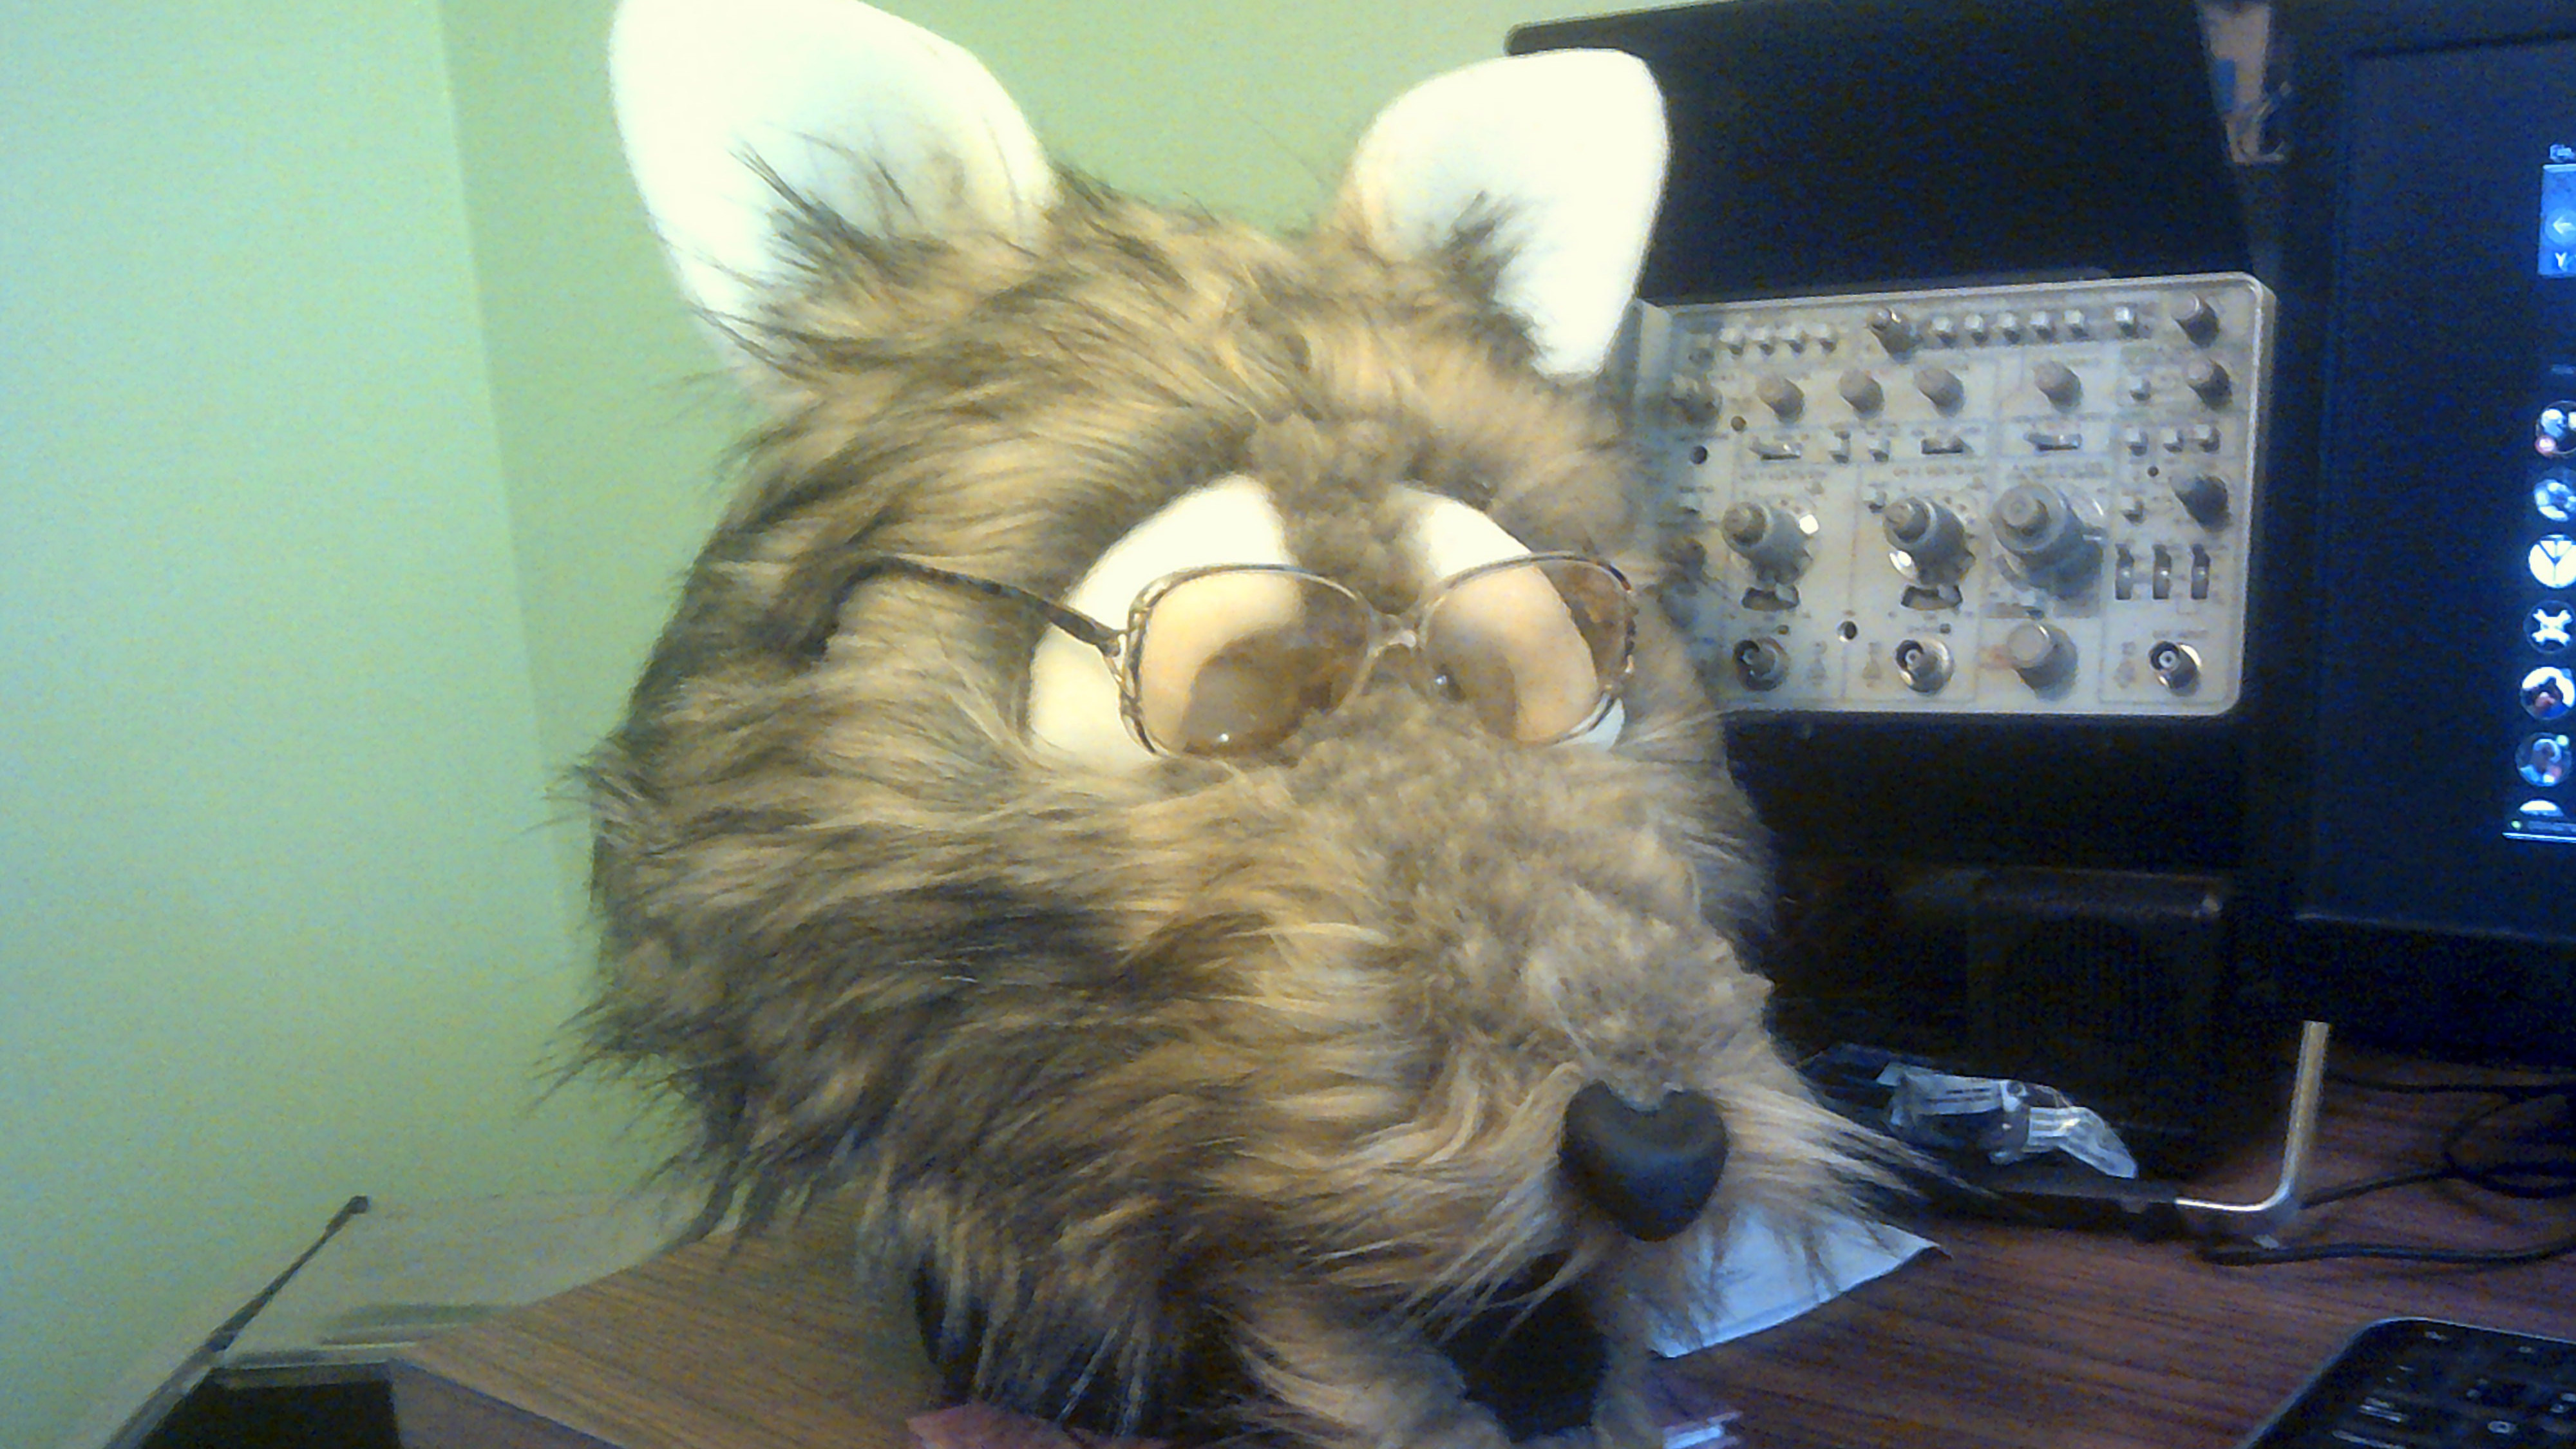 Rob, Furry Fursuit Foam Full Head Base for Fursuiting, for Furries